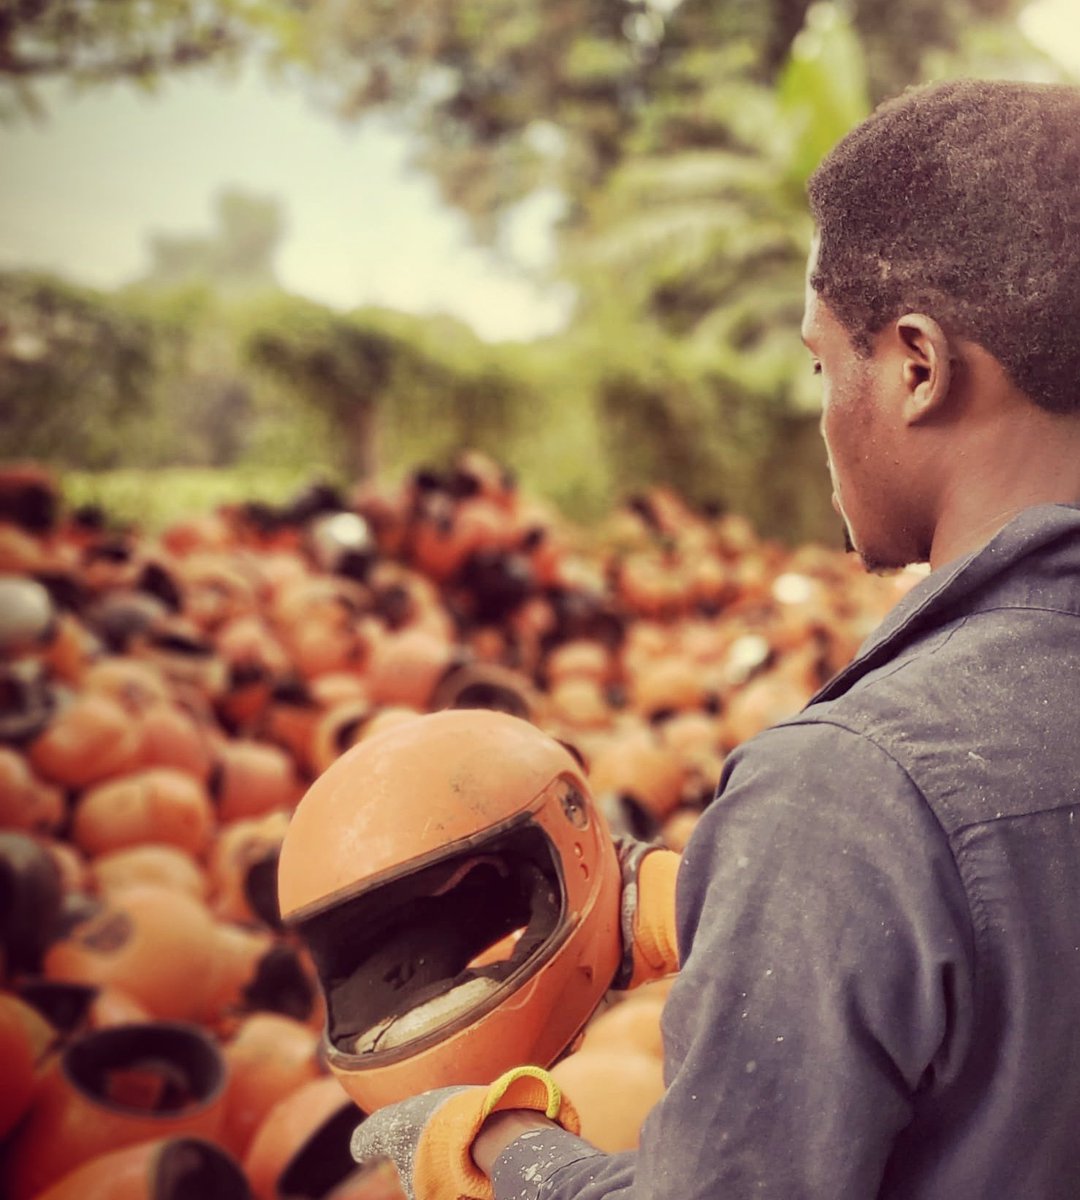 Revolutionizing helmet recycling 🌟 Our team is brainstorming innovative ways to give these safety heroes a second life. Eco-friendly art pieces, stay tuned as we pedal towards a greener, safer future! 🌿🚲 #SafeBoda #RecycleRevolution #EcoFriendly #InteriorDesignMasters